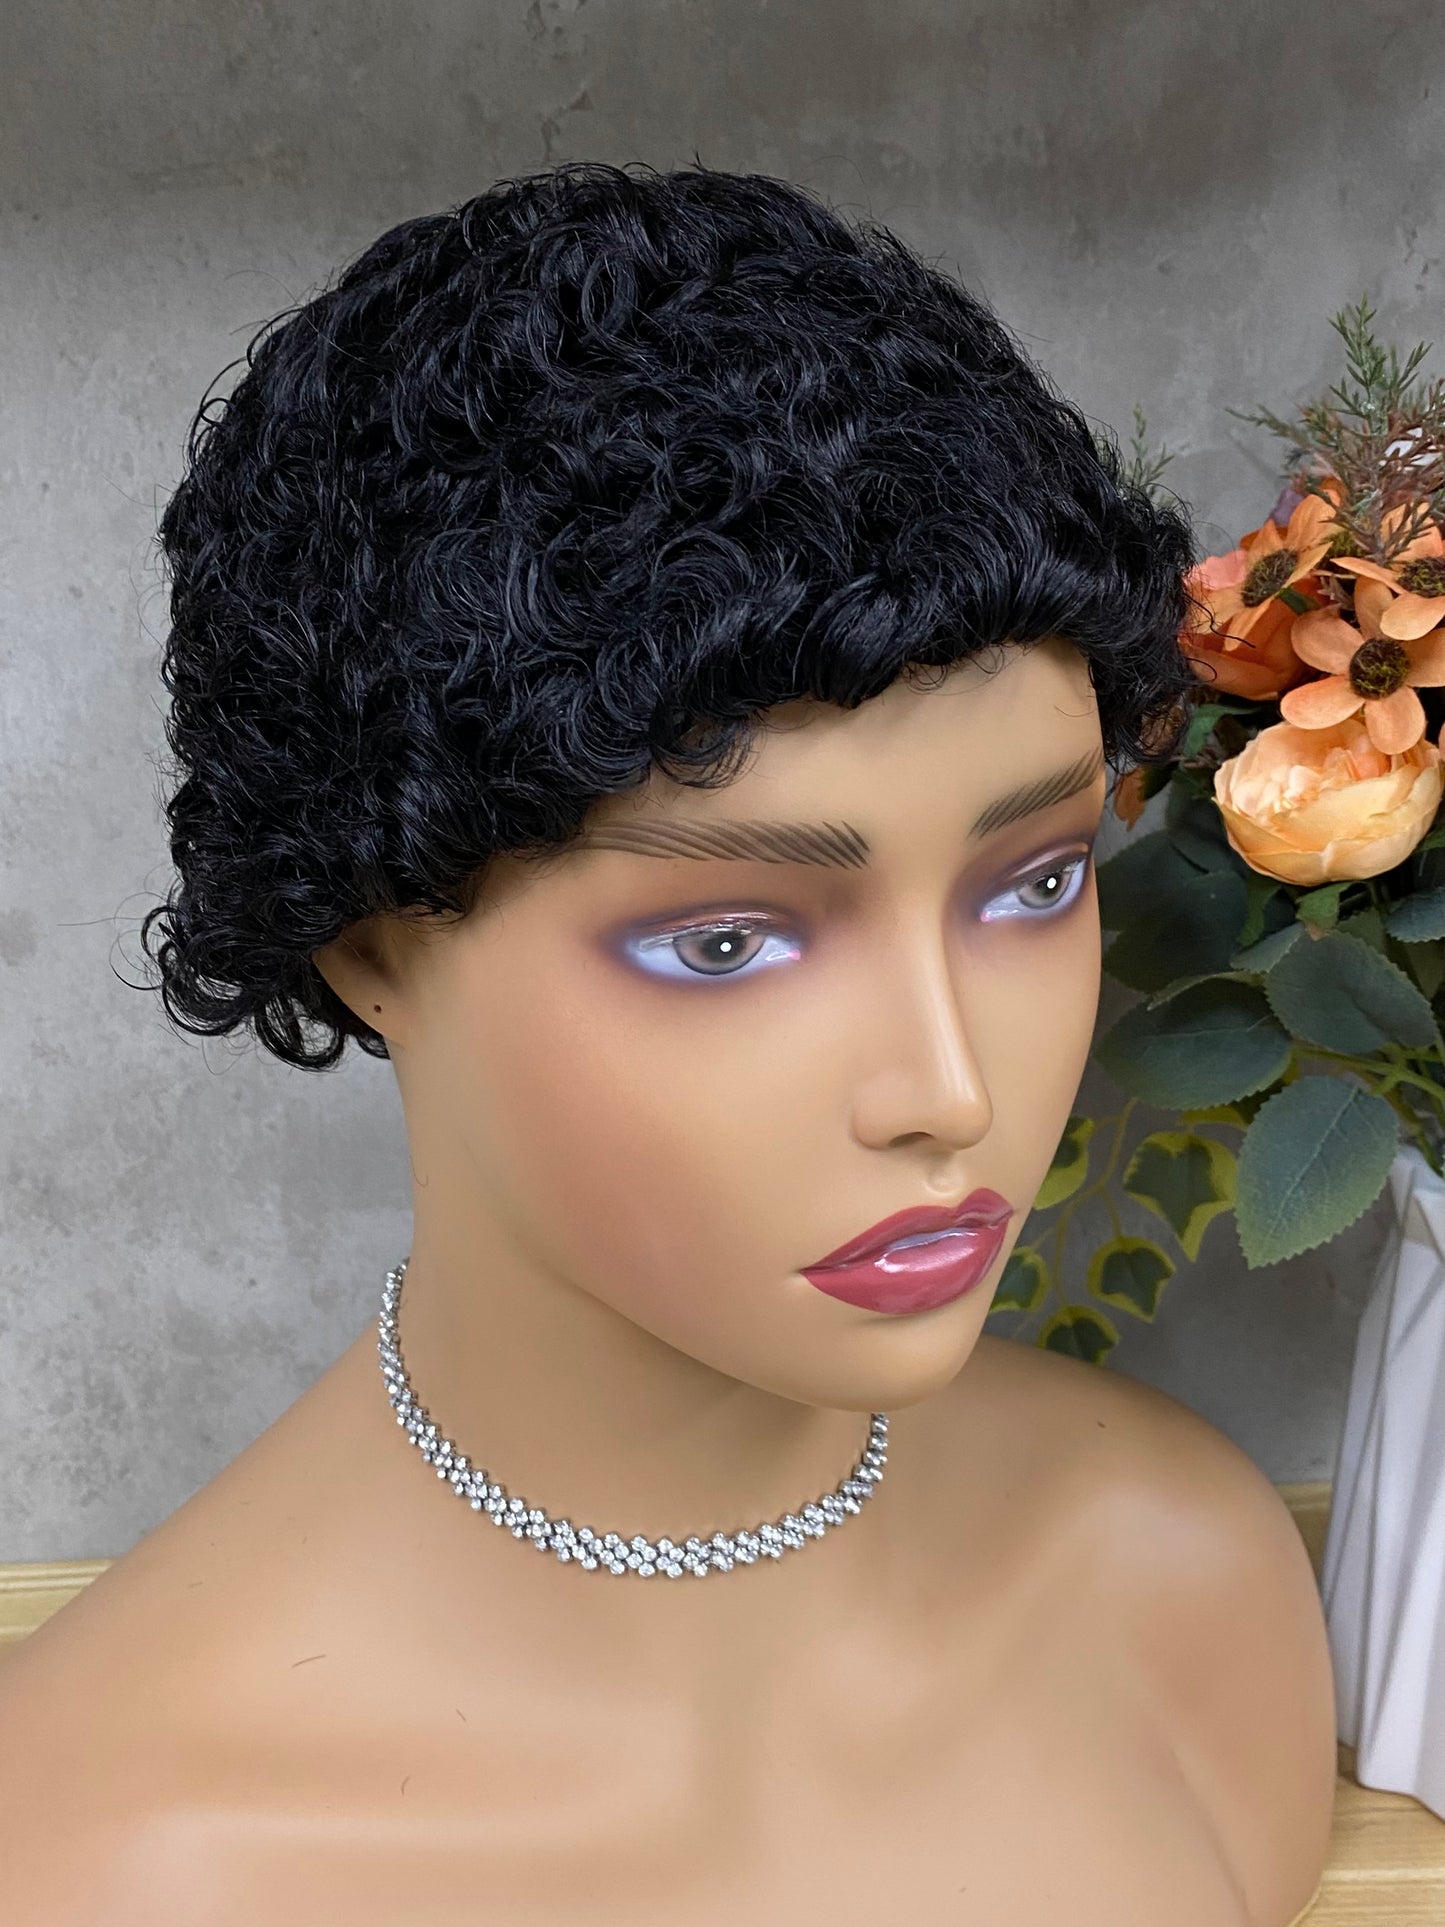 Special Texture Remy Human Hair Wool Curly Wig